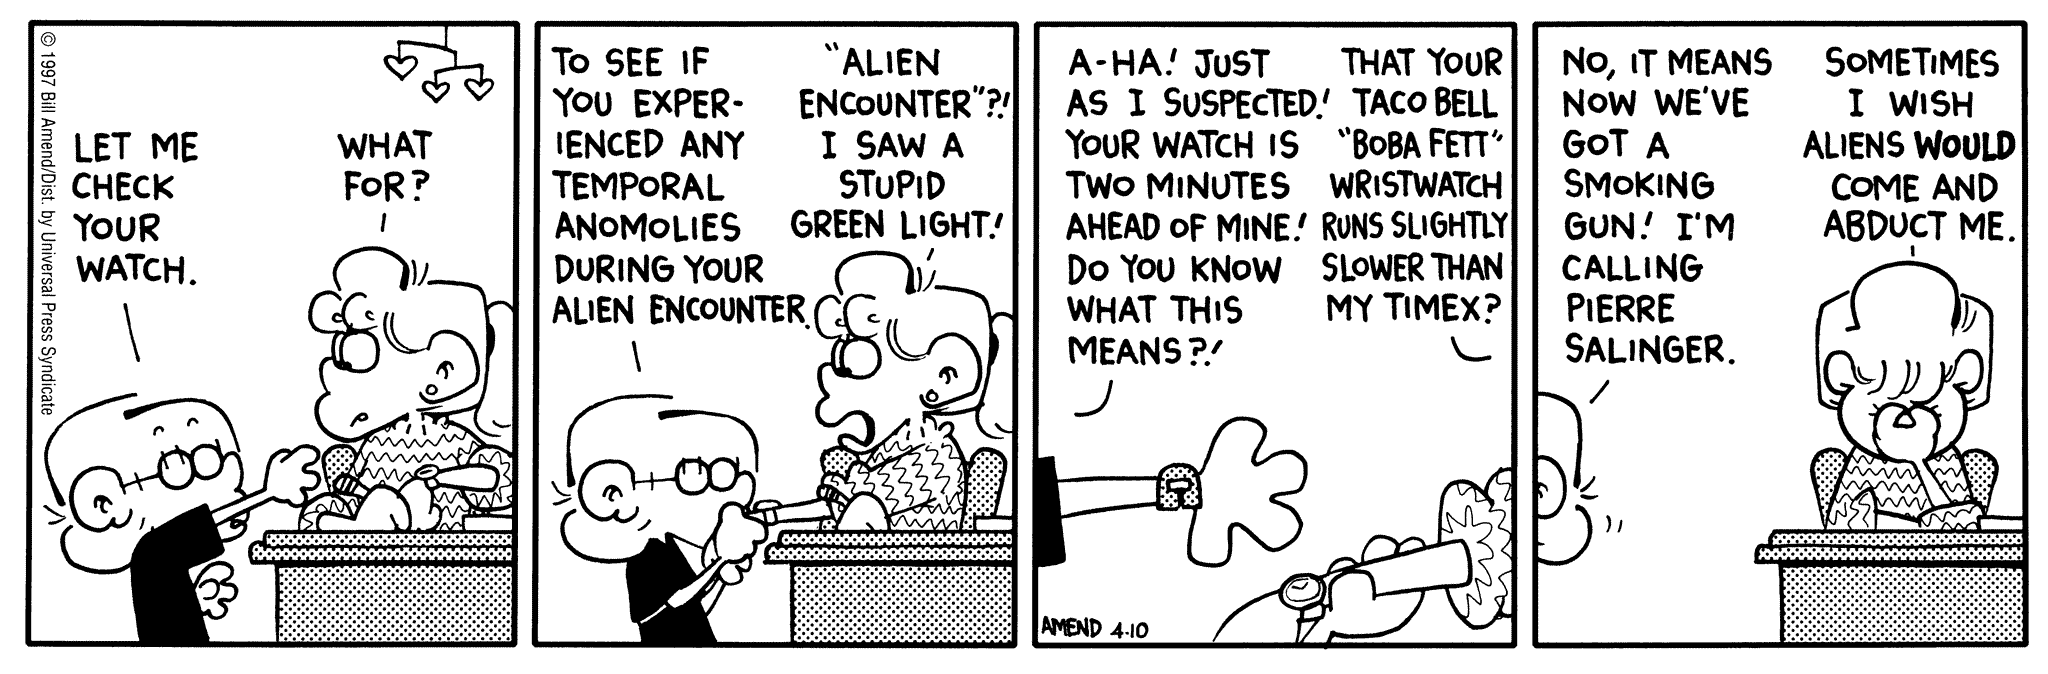 FoxTrot by Bill Amend April 10, 1997 - World UFO Day - Jason: Let me check your watch. Paige: What for? Jason: To see if you experienced any temporal anomalies during your alien encounter. Paige: "Alien encounter"?! I saw a stupid green light! Jason: A-ha! Just as I suspected! Your watch is two minutes ahead of mine! Do you know what that means?! Paige: That your Taco Bell "Boba Fett" wrist watch runs slightly slower than my Timex? Jason: No, it means now we've got a smoking gun! I'm calling Pierre Salinger. Paige: Sometimes I wish aliens would come and abduct me.